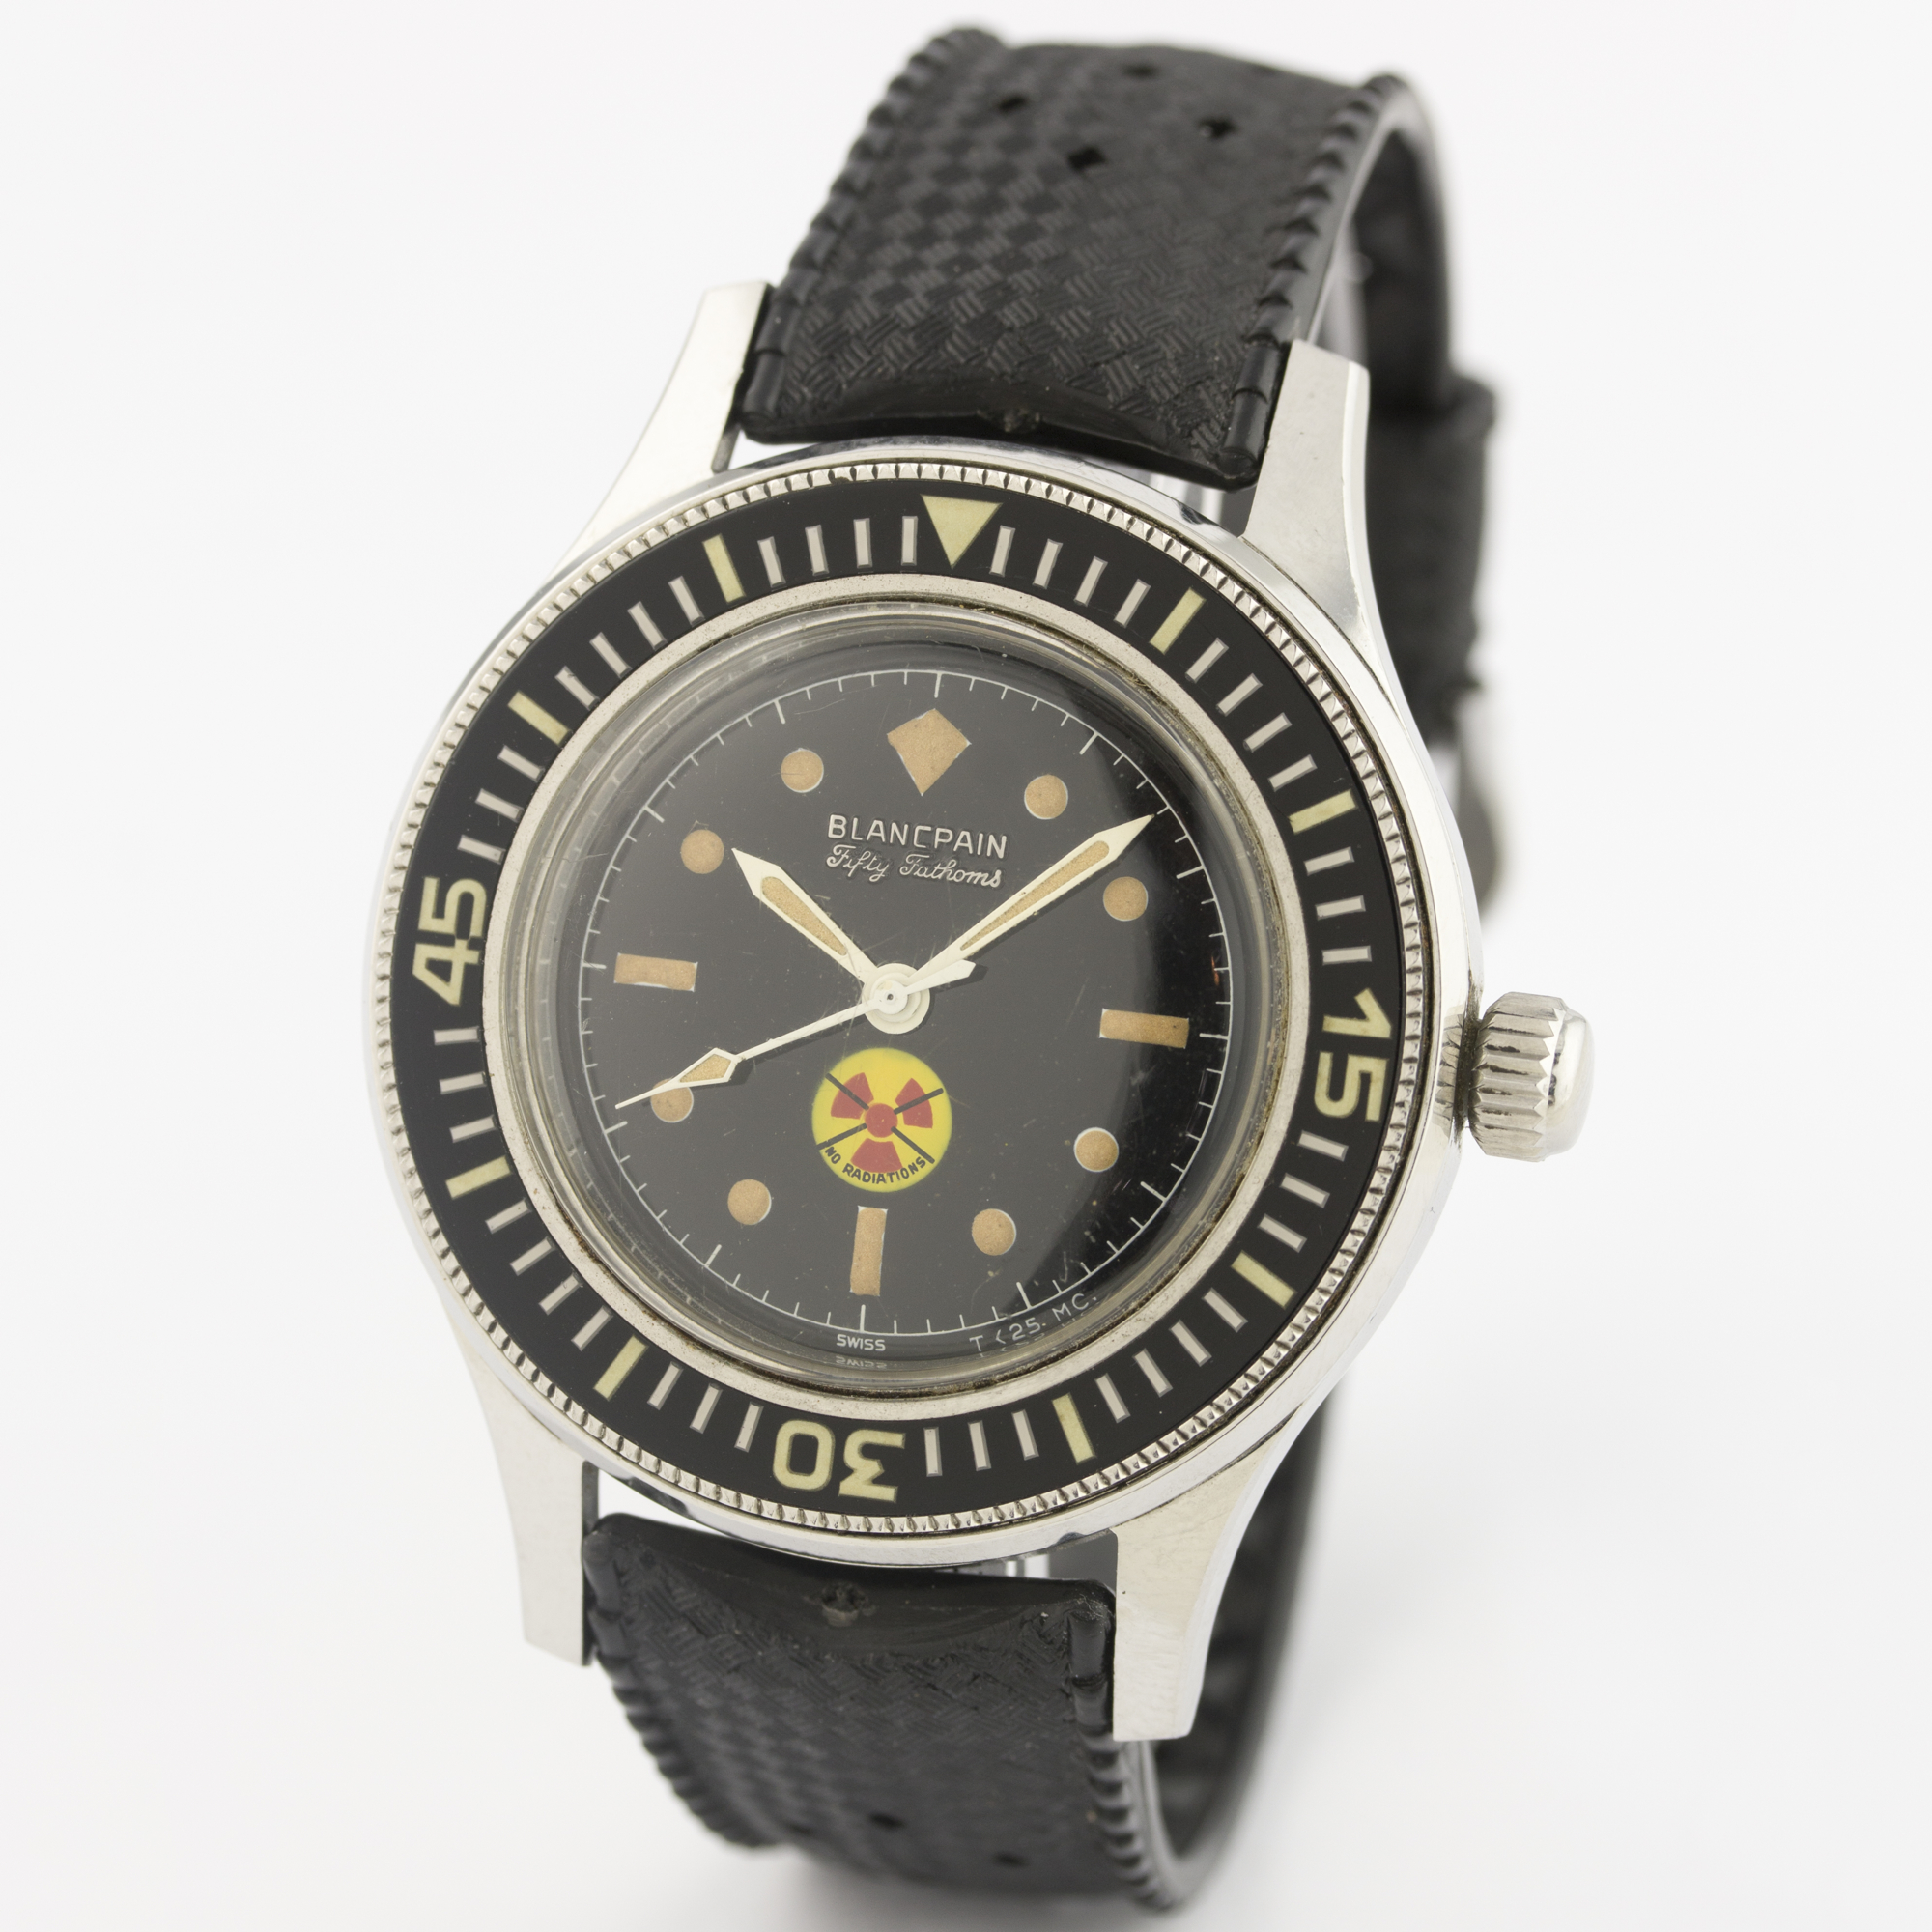 AN EXTREMELY RARE GENTLEMAN'S STAINLESS STEEL BLANCPAIN FIFTY FATHOMS DIVERS WRIST WATCH CIRCA 1960s - Image 3 of 9